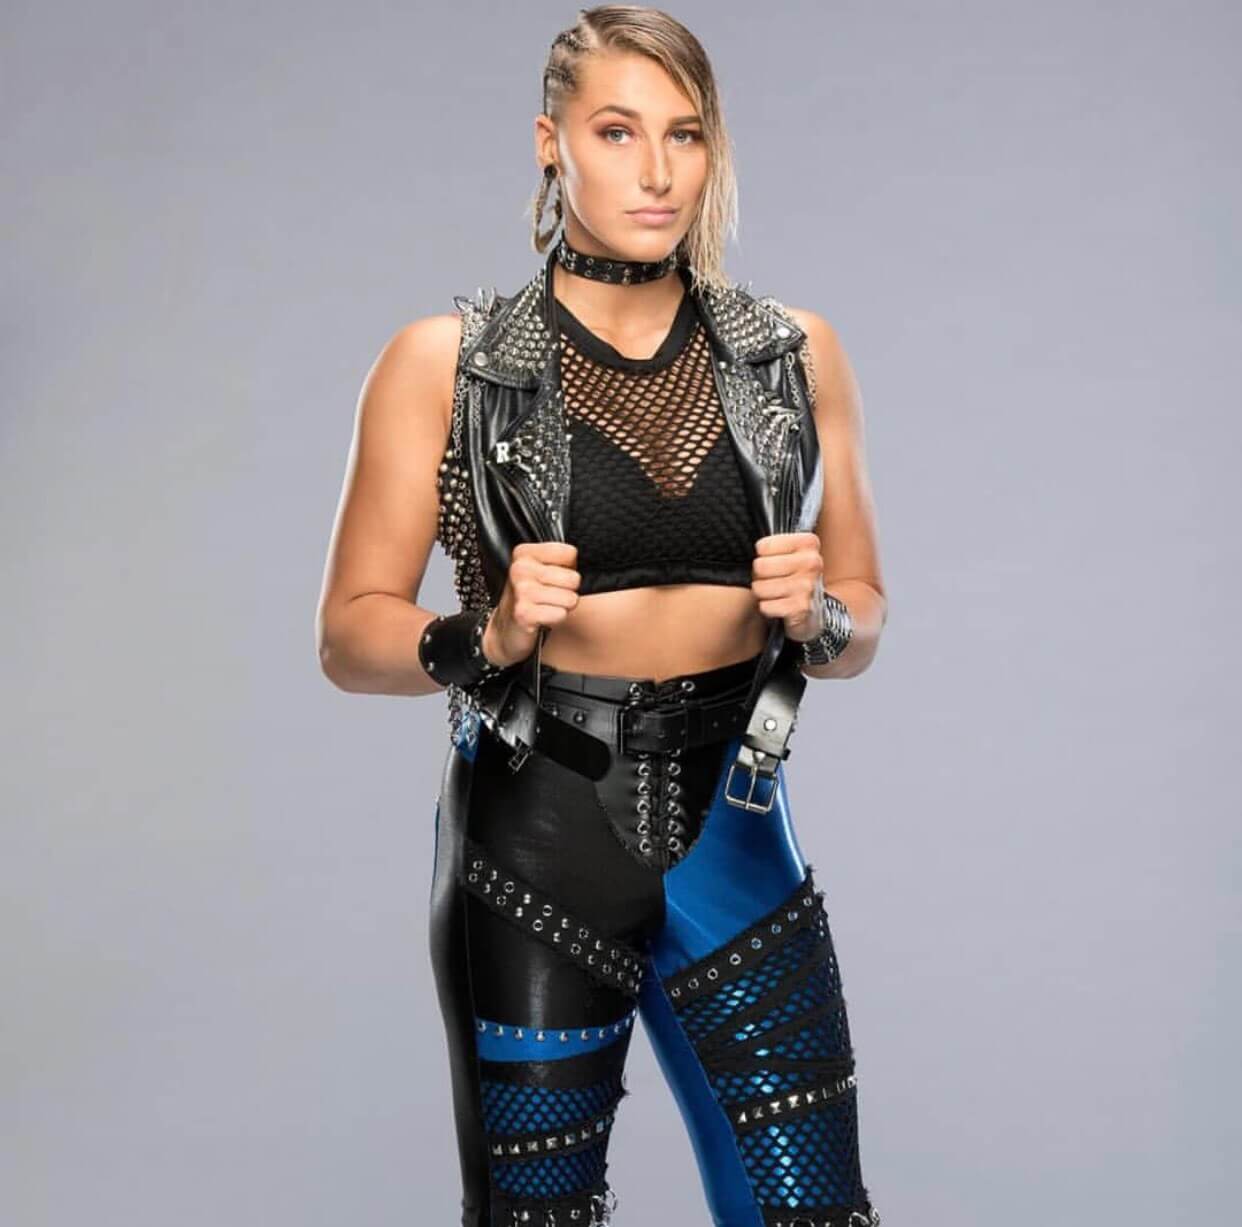 Hot Picture Of Rhea Ripley Which Are Wet Dreams Stuff. Best